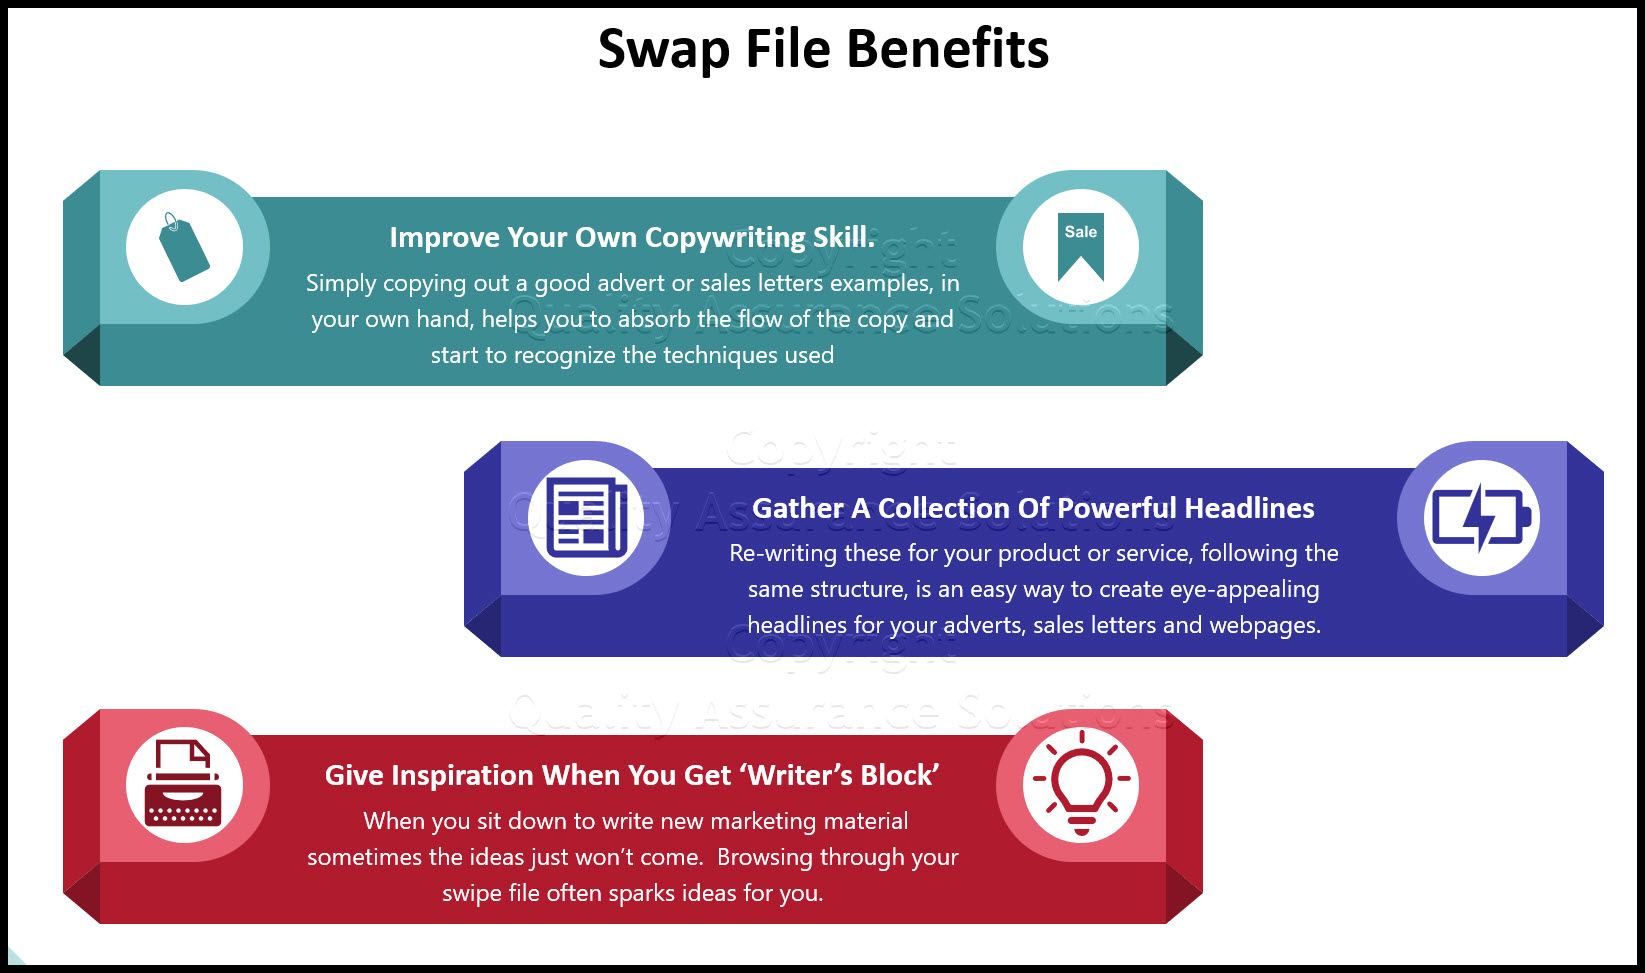 Create a swipe file full of sales letters examples that help you improve your copywriting and marketing skill set. 